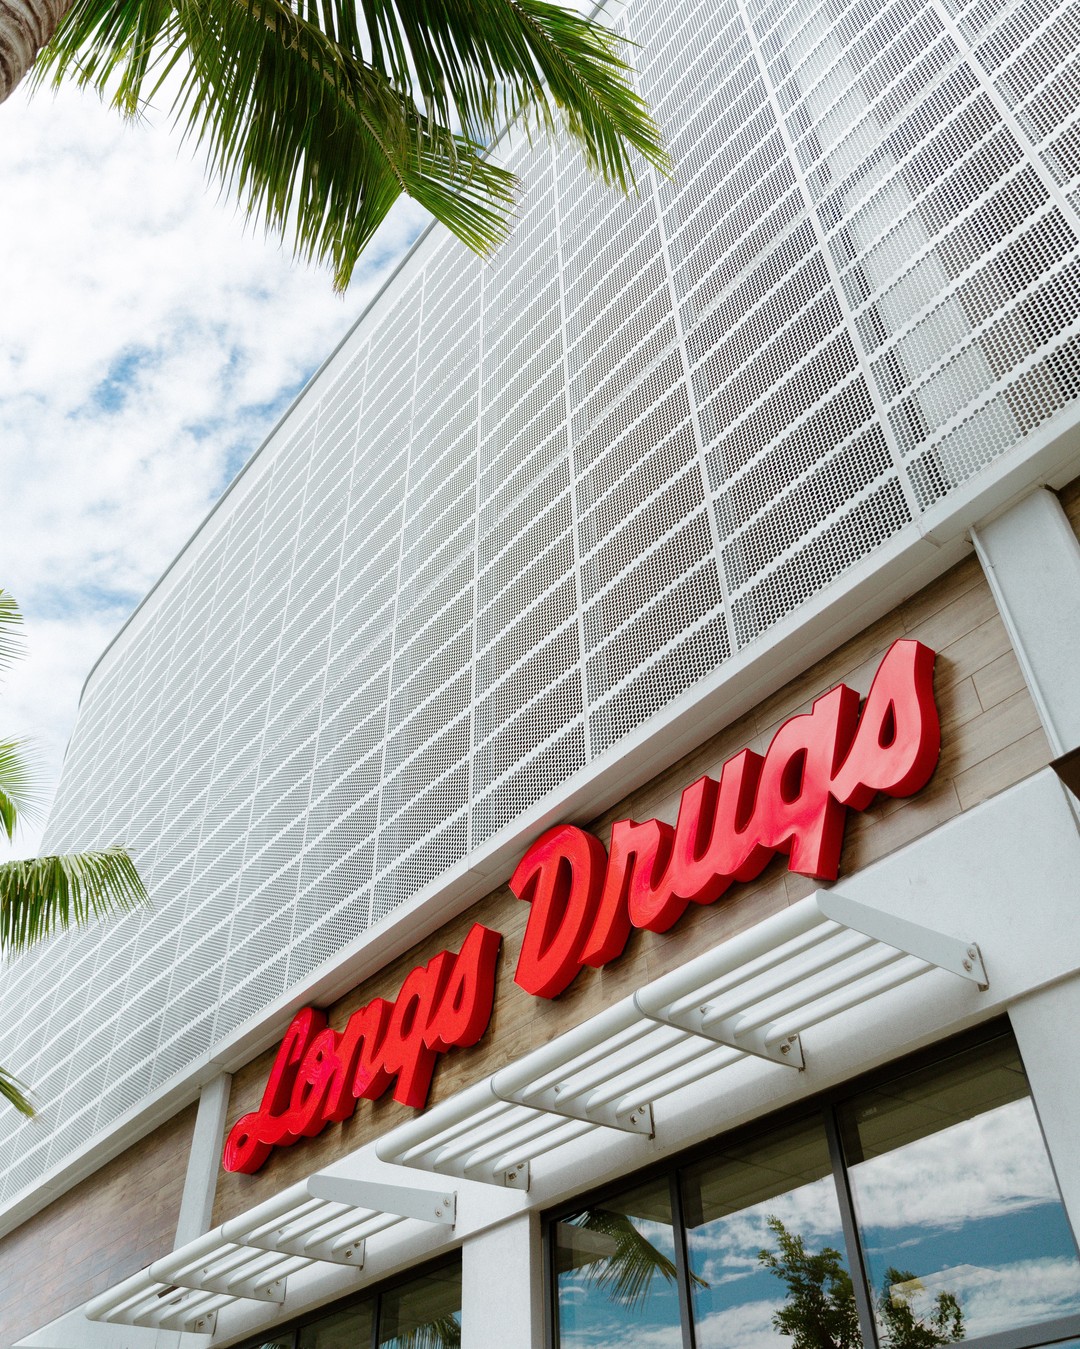 Longs Drugs, located on the ground level of Ke Kilohana, has you covered for all your day-to-day essentials (and maybe some snacks too). 🛒 Open daily for kupuna from 9am-10am and to the public from 10am-9pm, on the corner of Halekauwila St and Ward Ave.